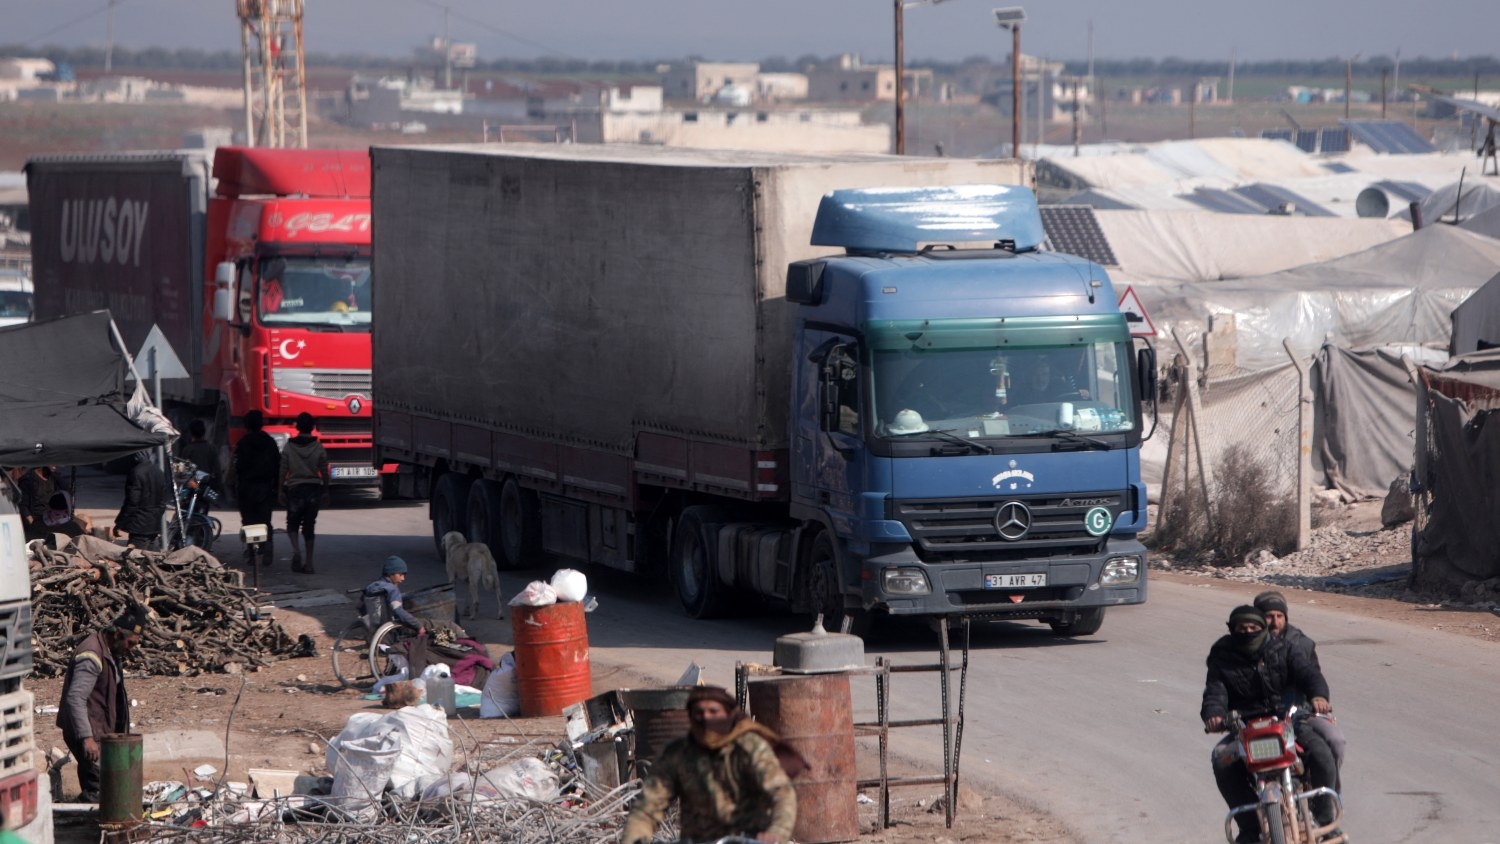 A convoy of trucks from Doctors Without Borders, carrying aid to earthquake victims, enters Syria via the al-Hamam border crossing on 19 February 2023.